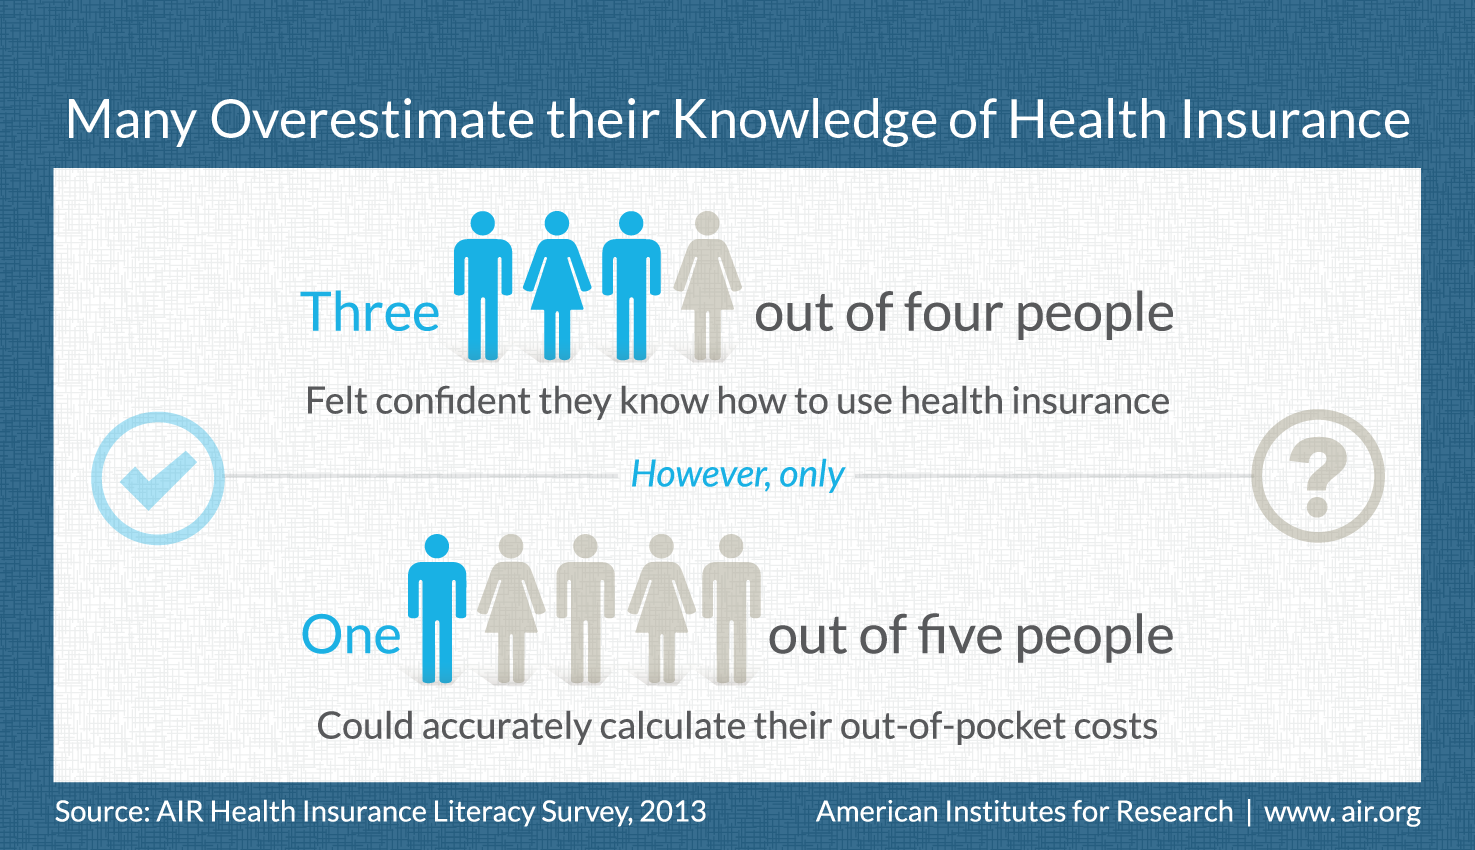 Health Insurance Literacy Infographic from AIR Survey findings: 3 in 4 people said they have the knowledge to use health insurance, however only, 1 in 5 people could calculate their out-of-pocket costs